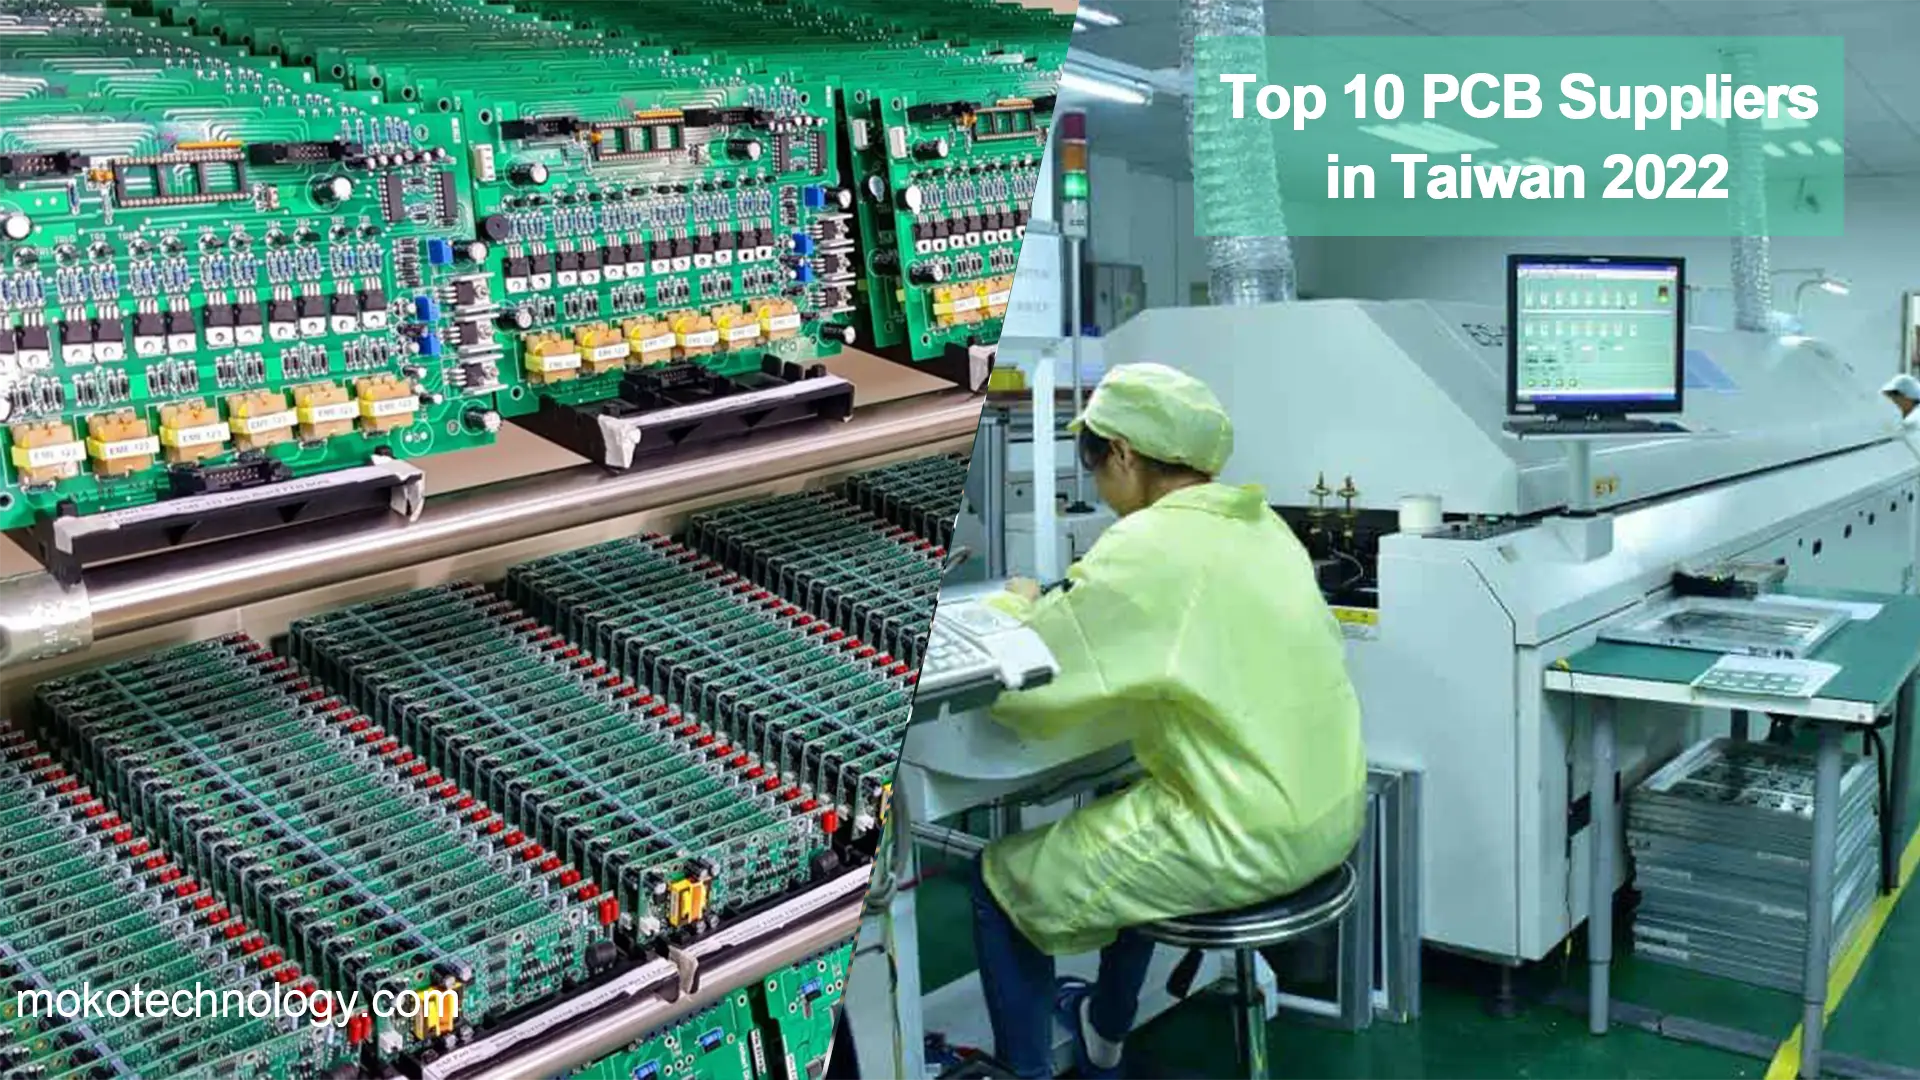 Top 10 PCB Suppliers in Taiwan 2022